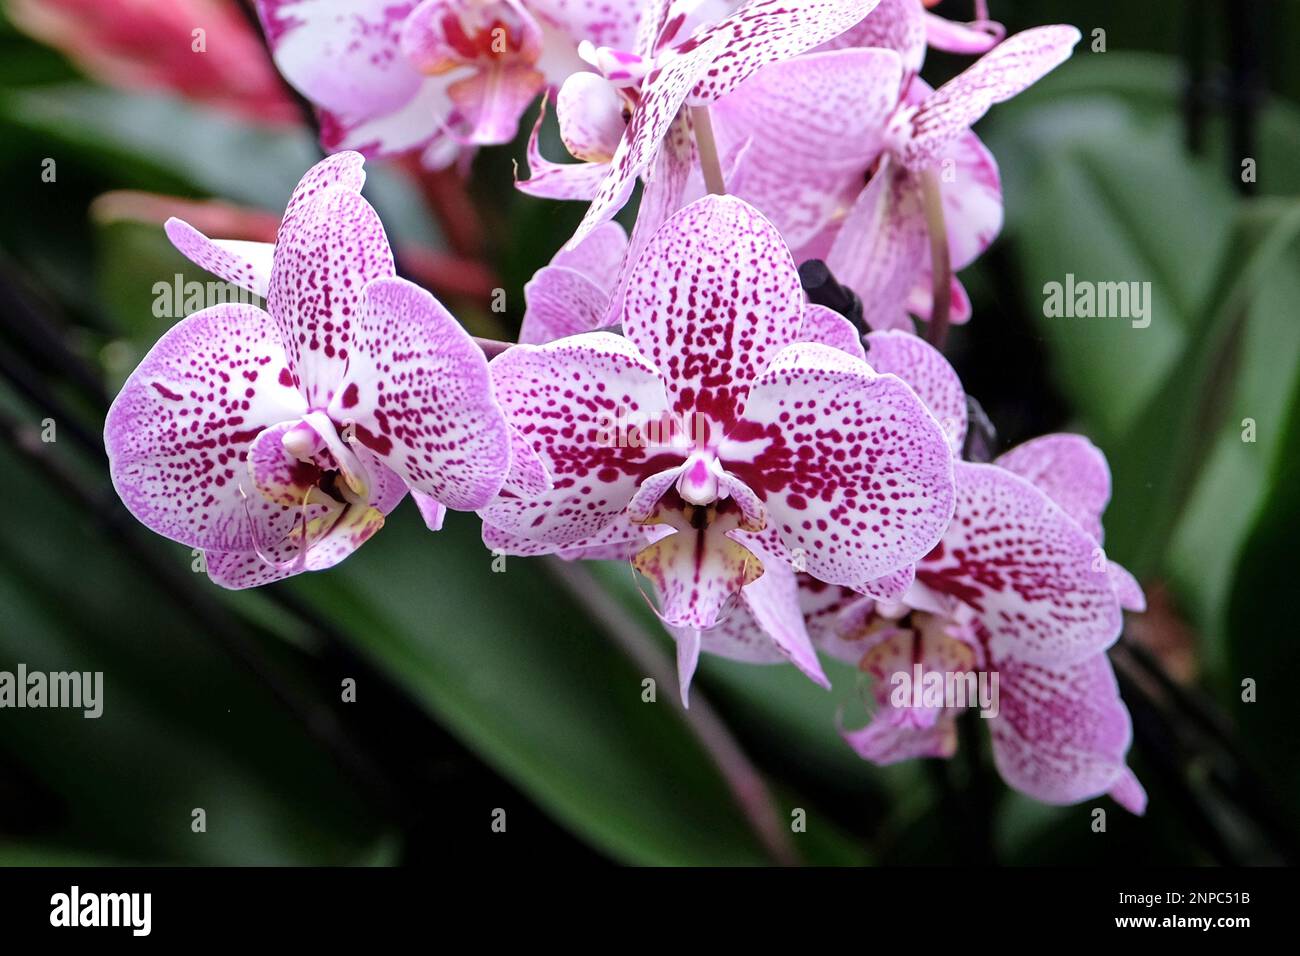 Purple and white speckled phalaenopsis moth orchids in flower. Stock Photo